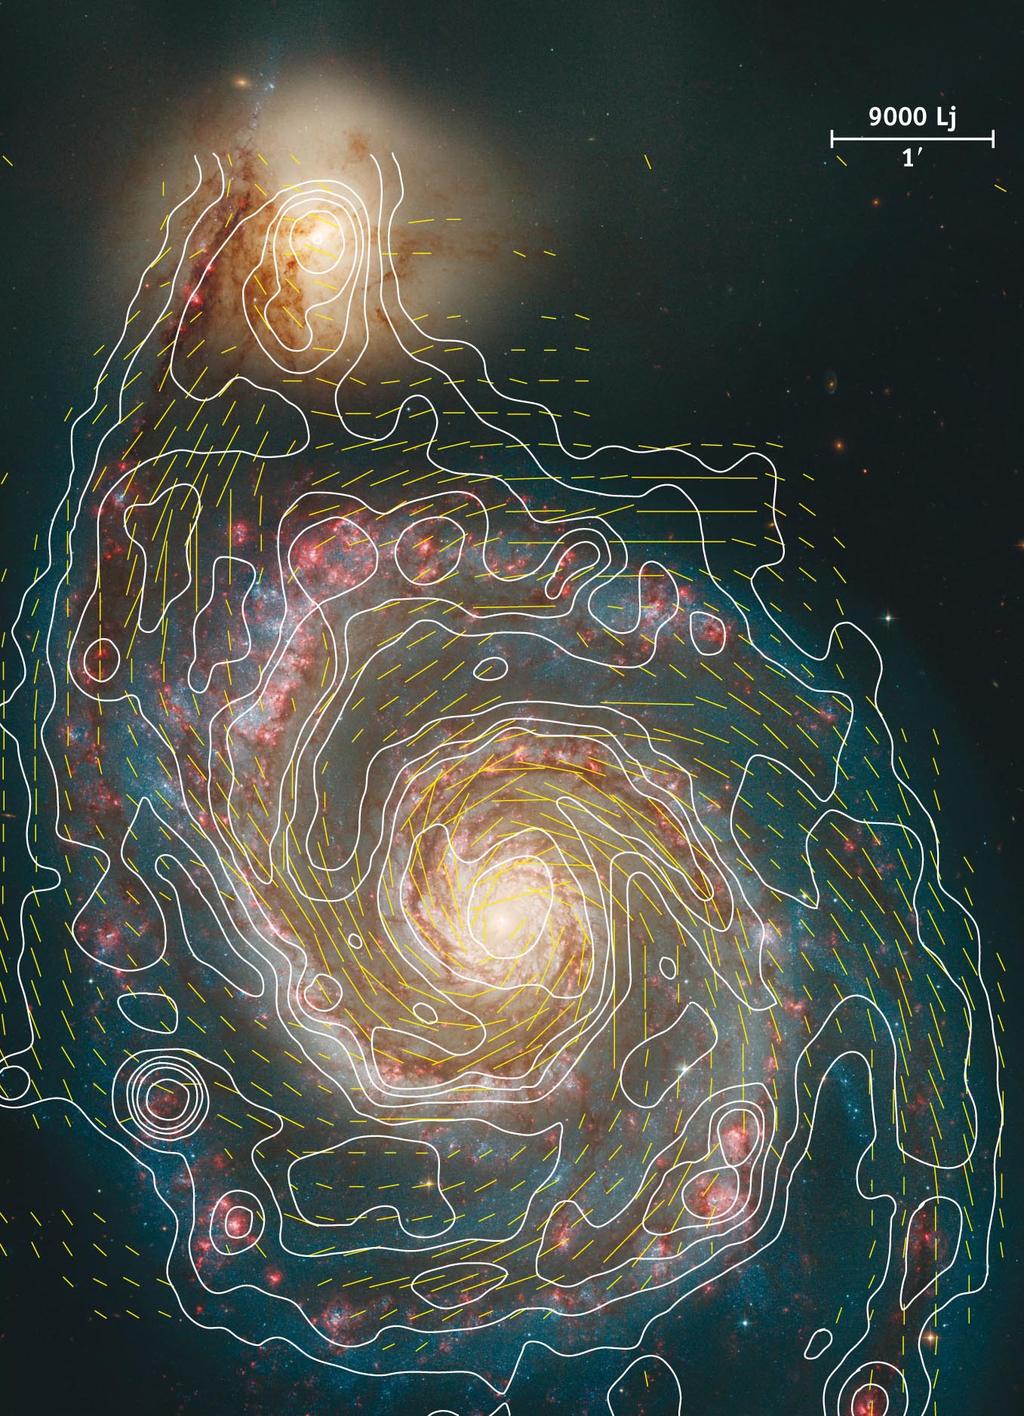 MAGNETIC FIELDS IN SPIRAL